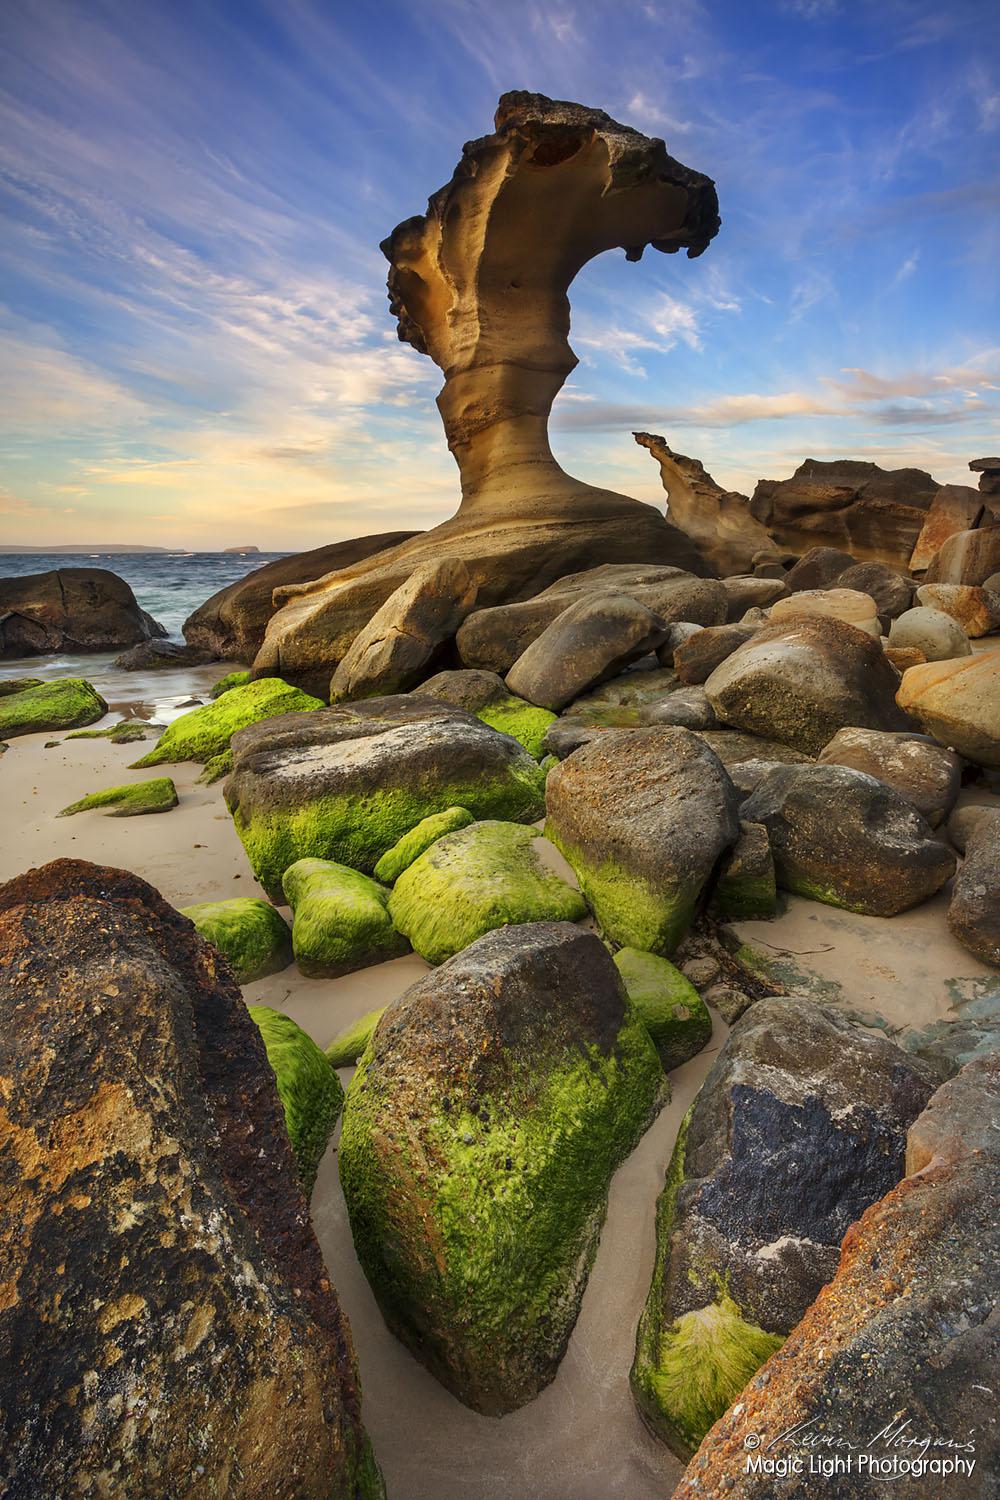 The amazing natural rock sculptures at the southern end of Hargraves Beach in Noraville on the Central Coast of New South Wales, Australia.